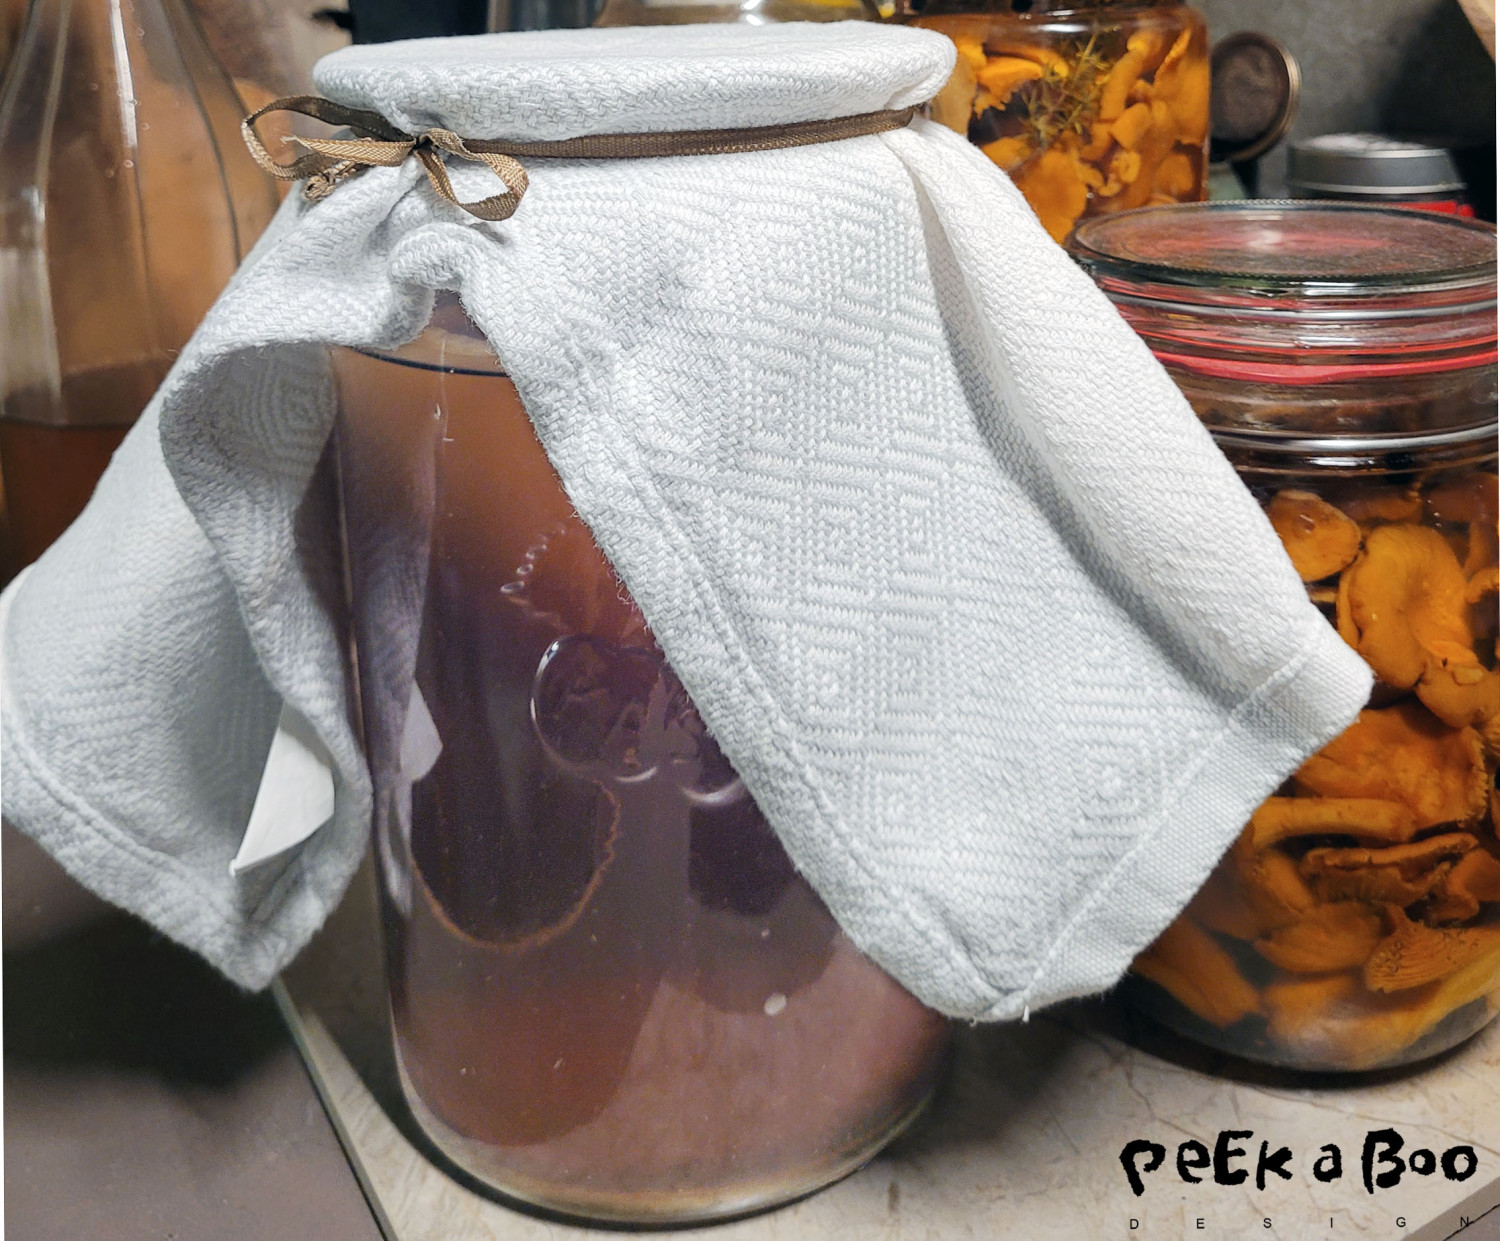 Now leave your kombucha so that it can ferment under a cloth in a dark corner with a constant room temperature.